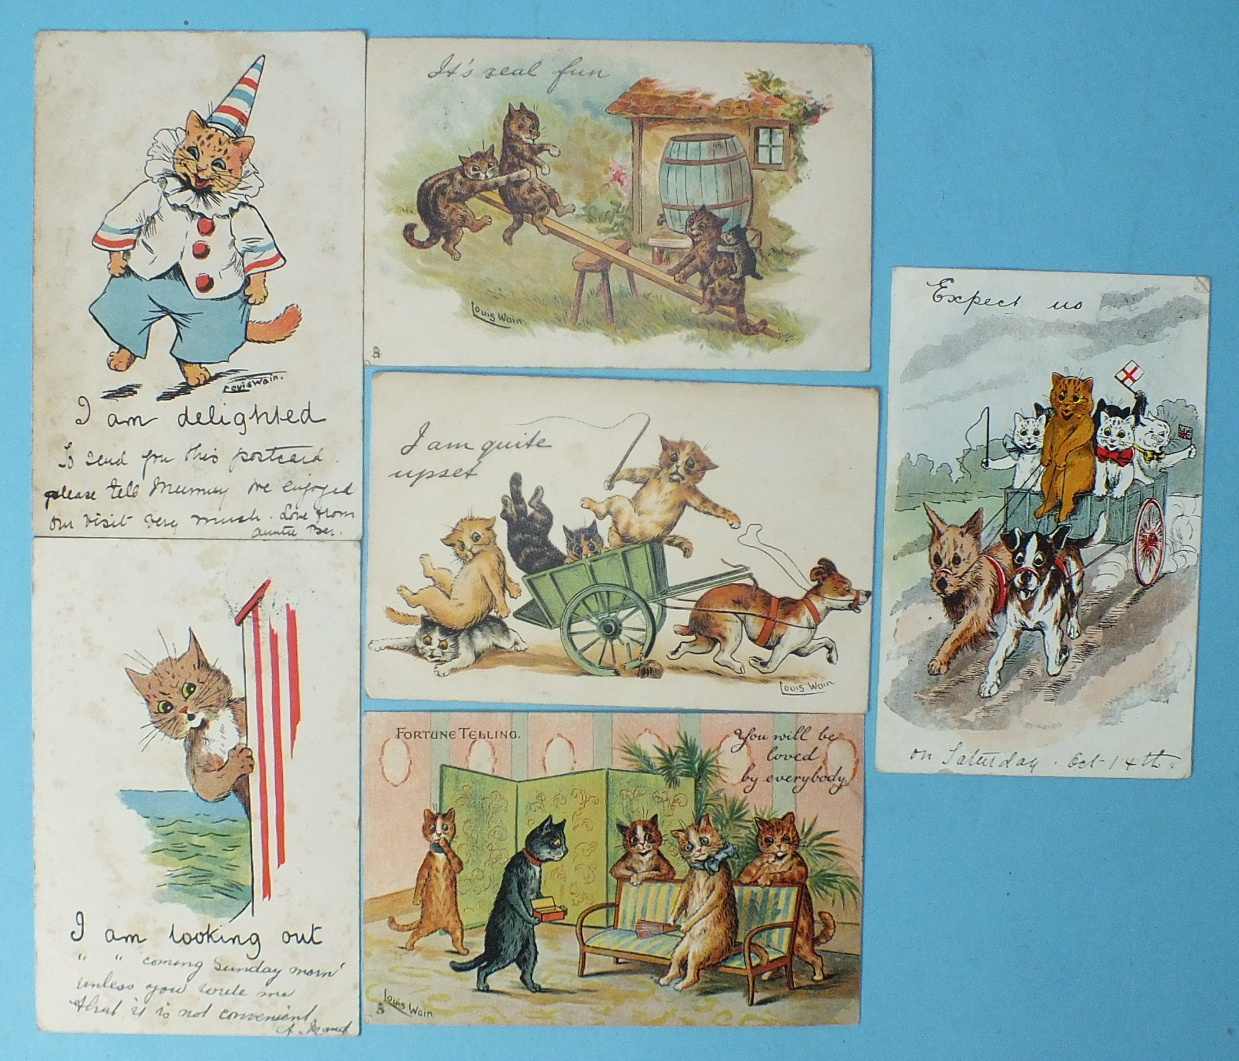 Six Louis Wain postcards: "I am looking out", "I am delighted", "I am quite myself", "It's real